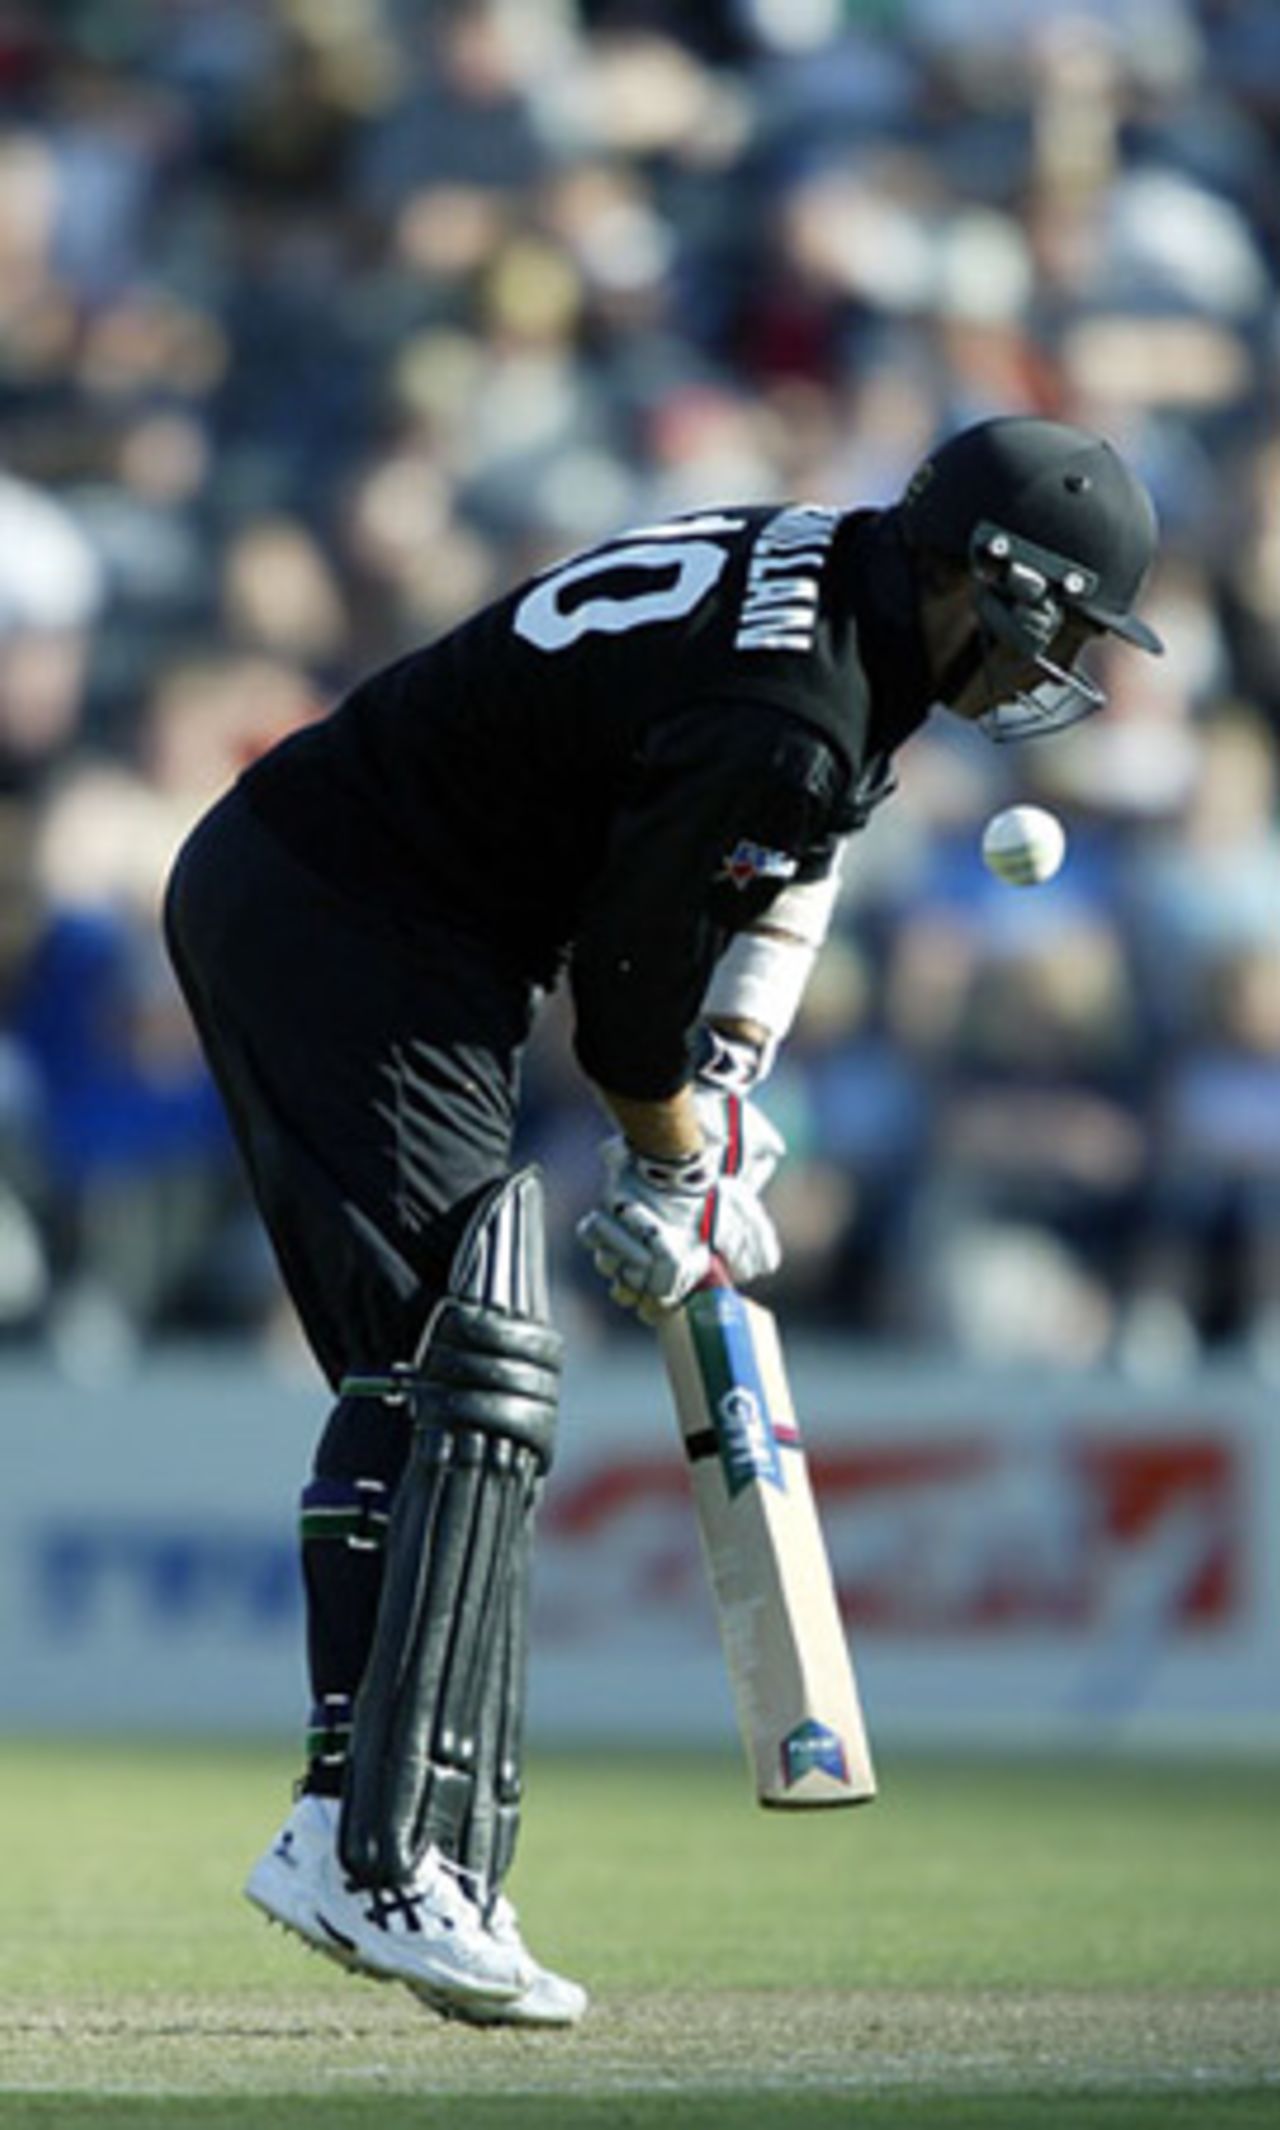 New Zealand batsman Craig McMillan attempts to defend a short delivery during his innings of 22. 3rd ODI: New Zealand v India at Jade Stadium, Christchurch, 1 January 2003.